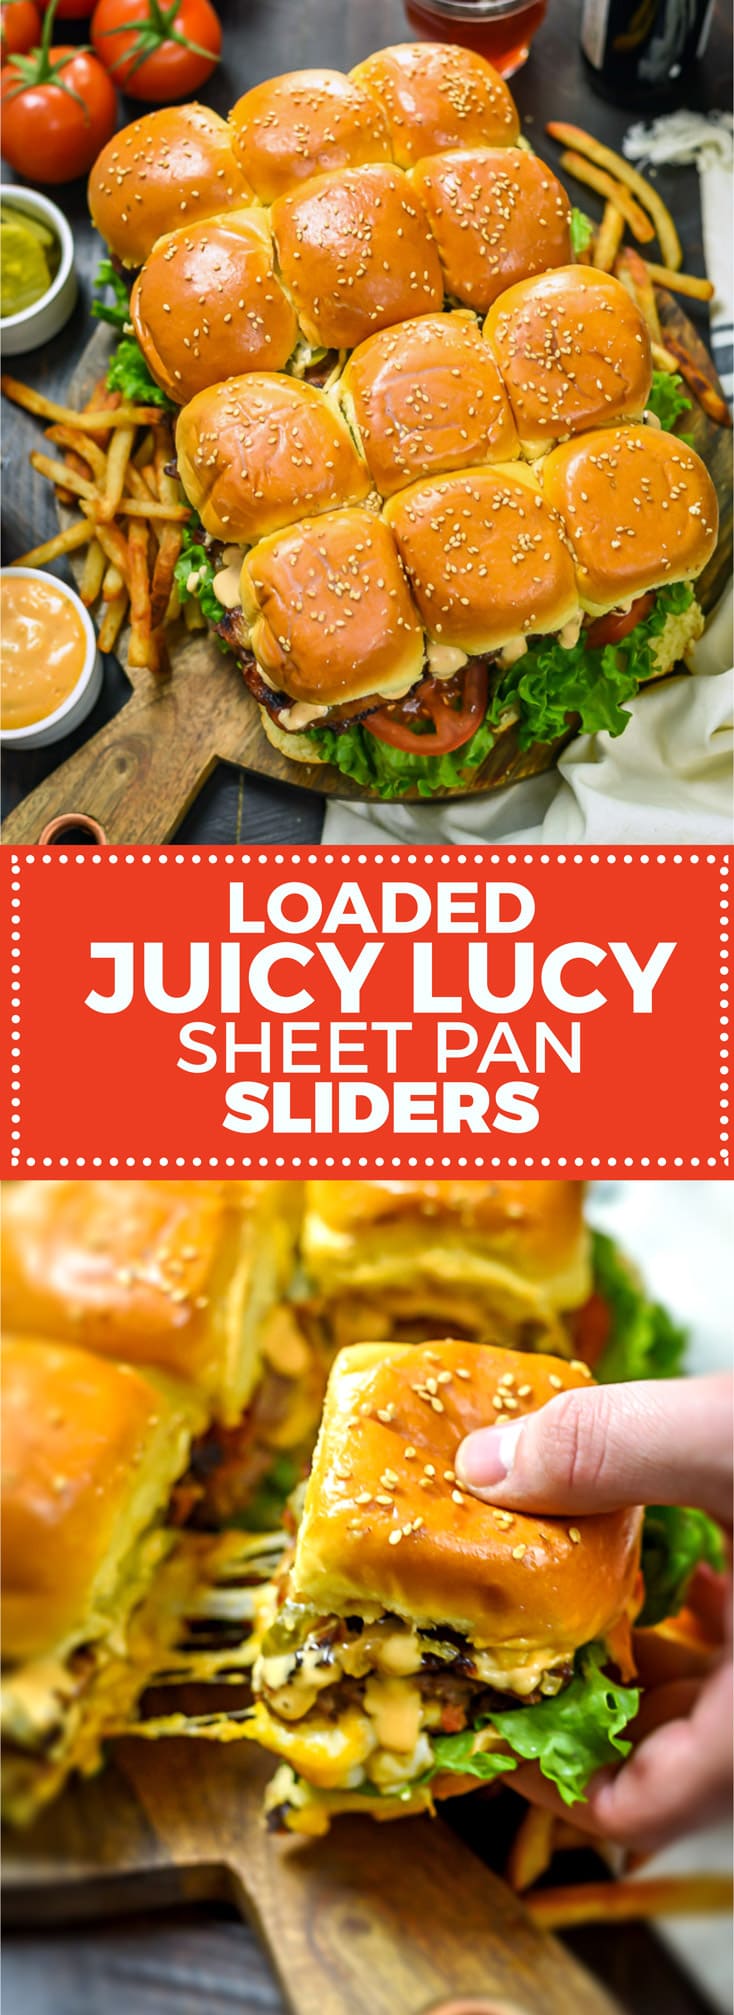 Loaded Juicy Lucy Sheet Pan Sliders - Host The Toast